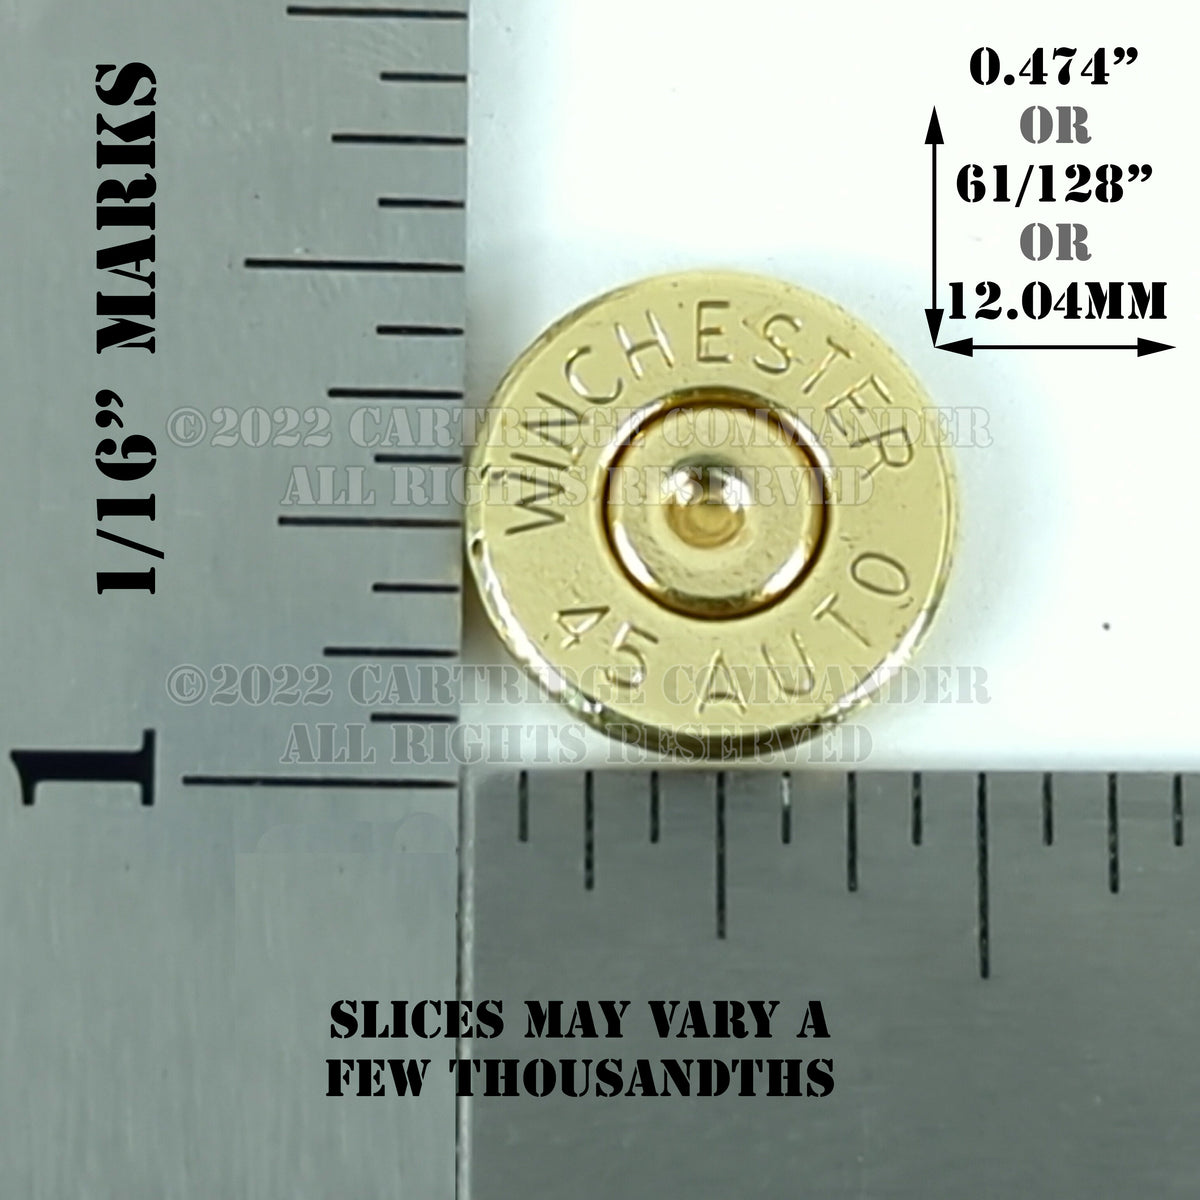 50 BMG brass thincut bullet slices, mix mfg, 10-pack – Cartridge